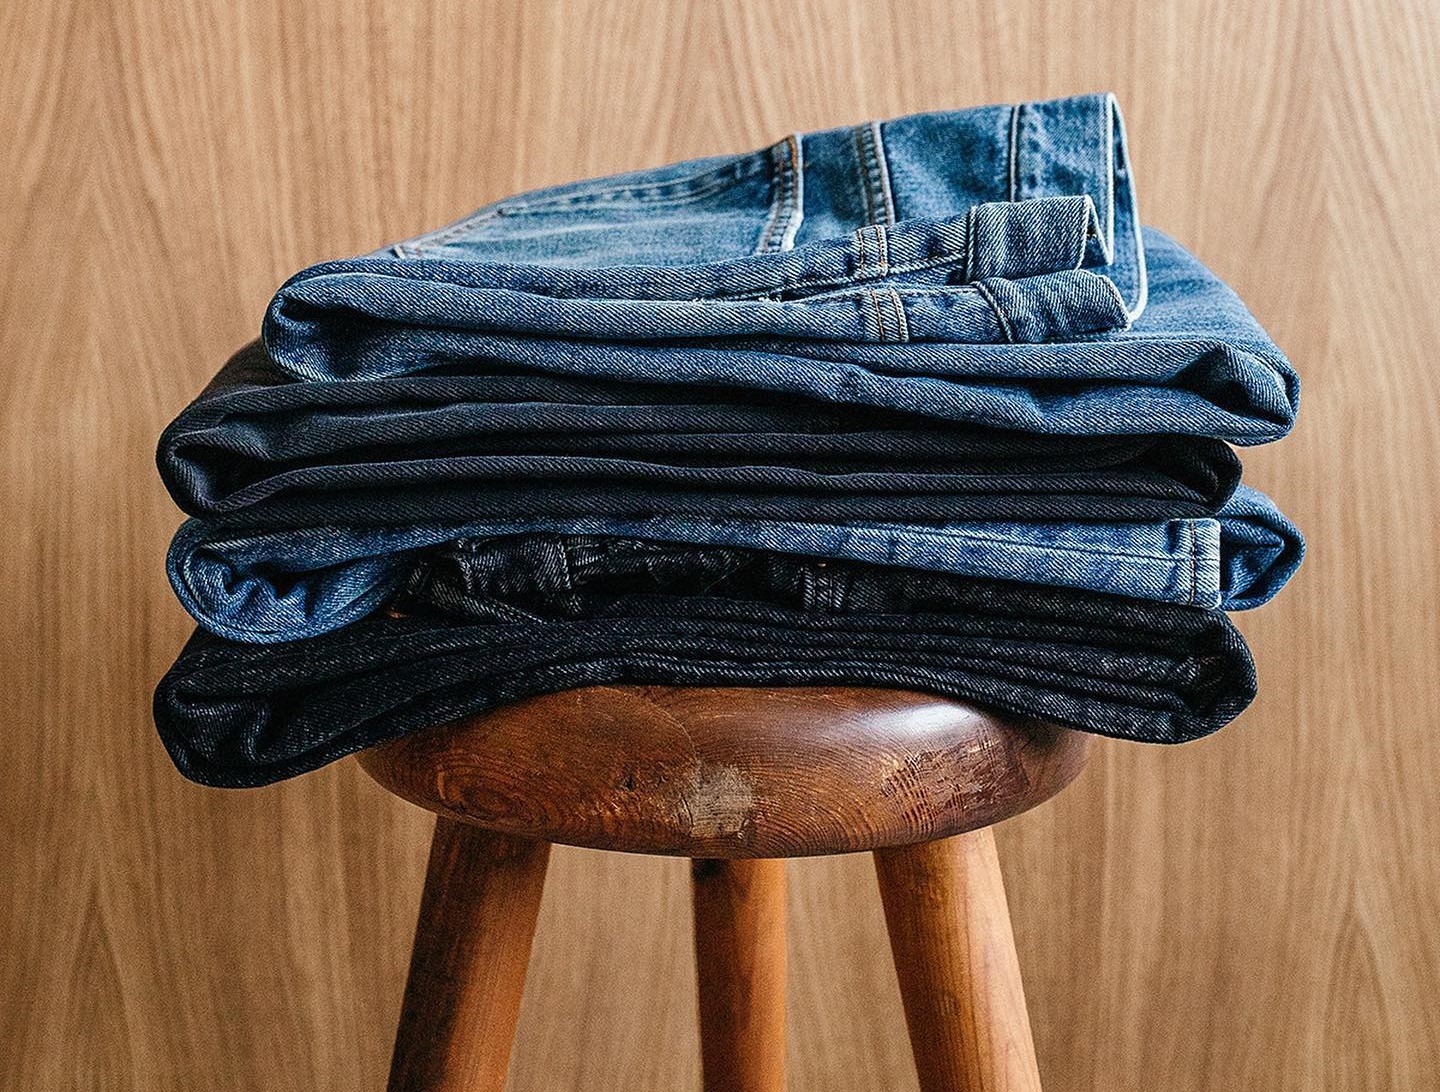 10 Of The Best Japanese Denim Brands To Invest In For Years To Come (Updated 2022)